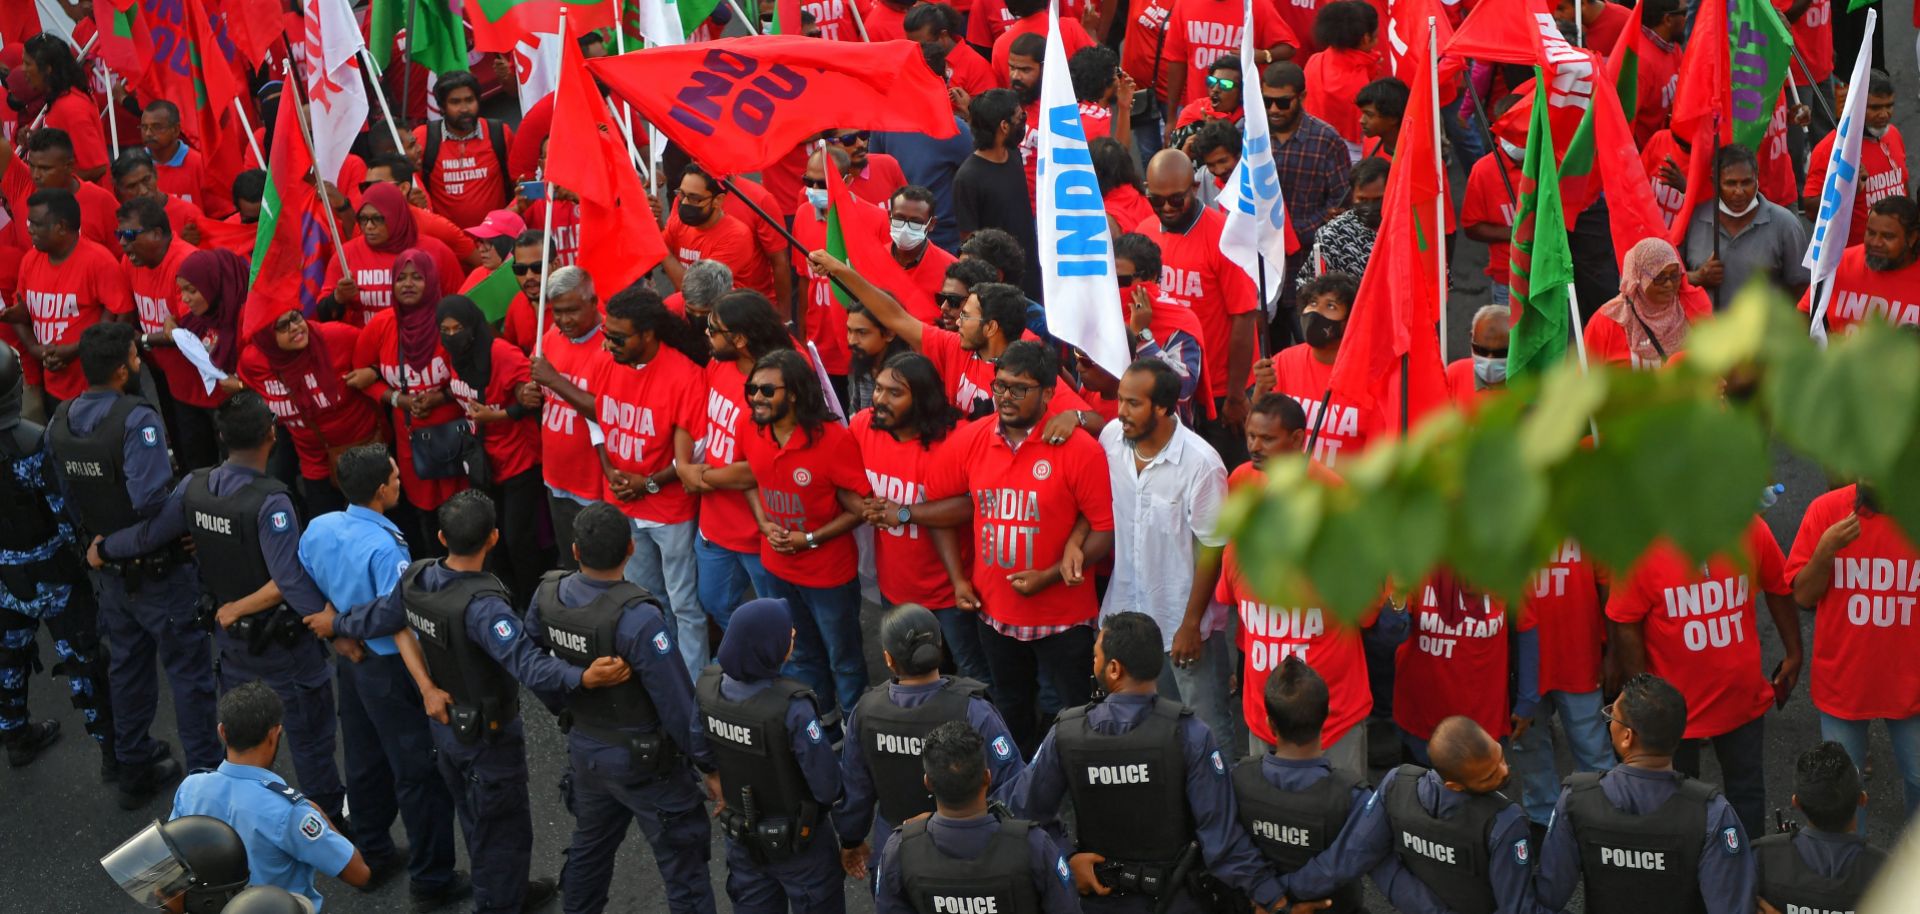 Police stand guard in Male, the Maldives, as protesters take part in an anti-India rally organized by the island nation's opposition coalition on March 25, 2022. 